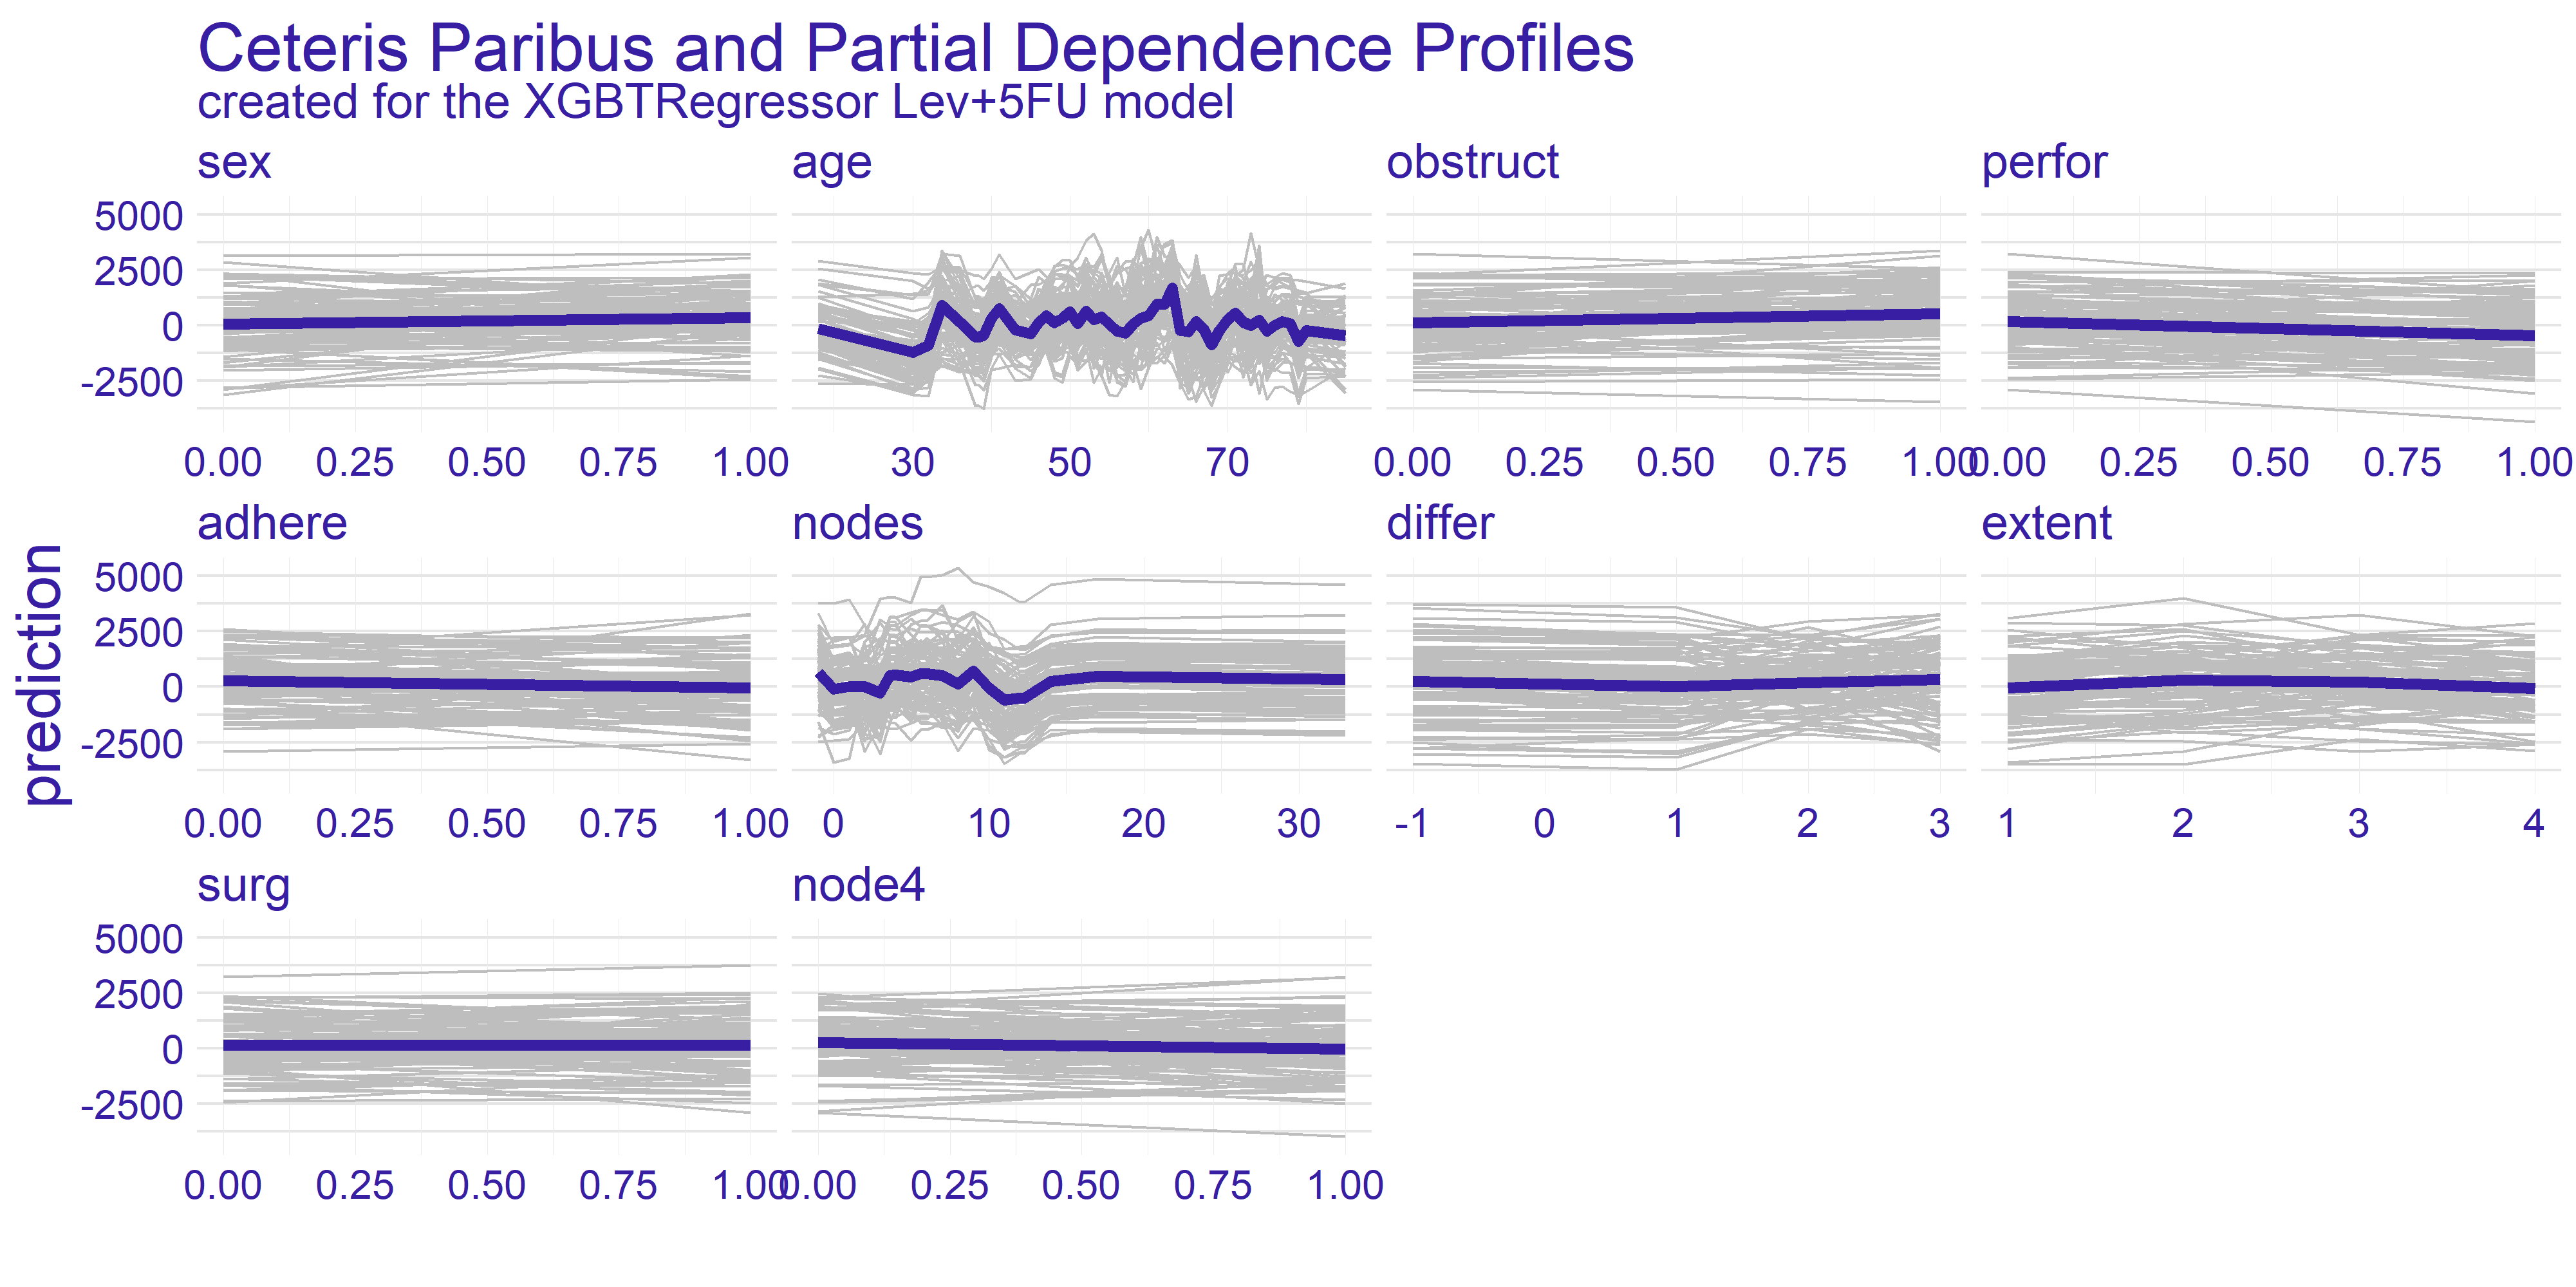 Ceteris Paribus and Partial Dependence Profiles for every variable in the dataset with regard to models representing different treatments.